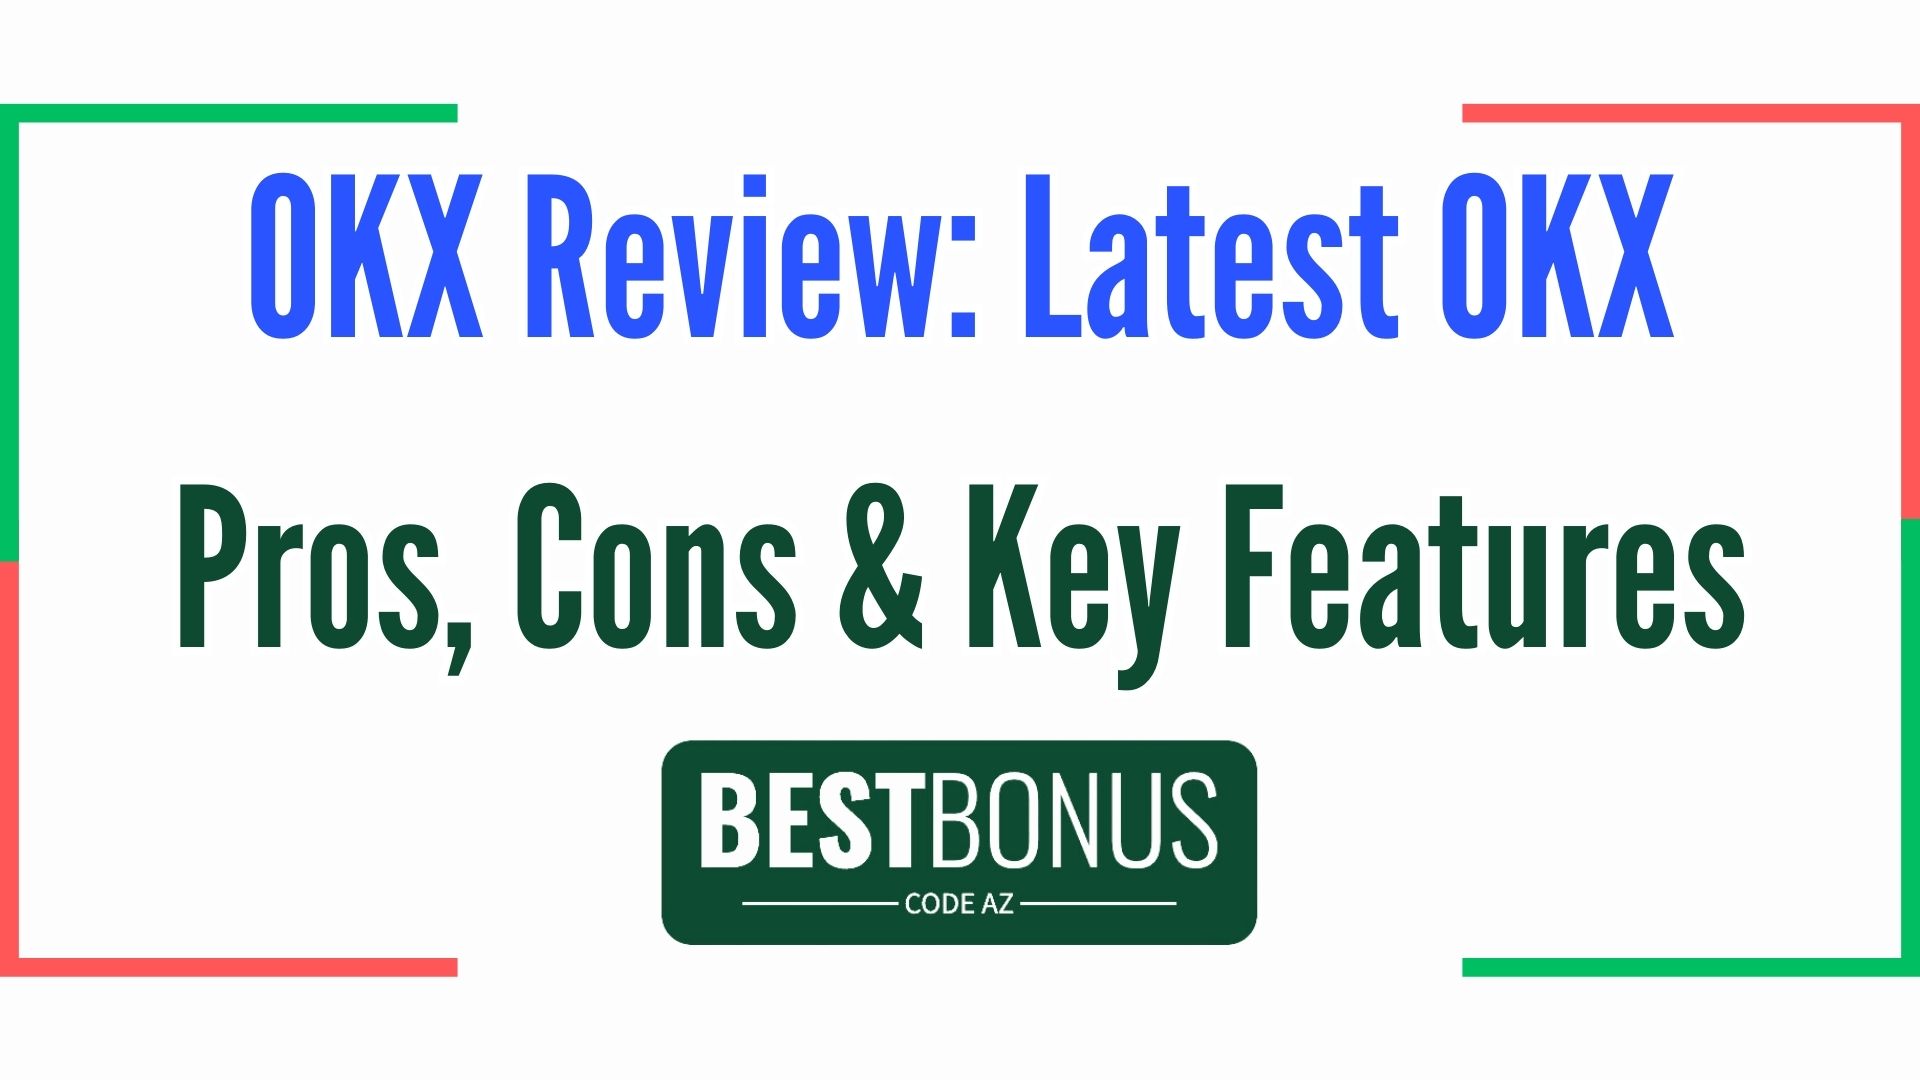 OKX Review: Latest OKX Pros, Cons, and Key Features